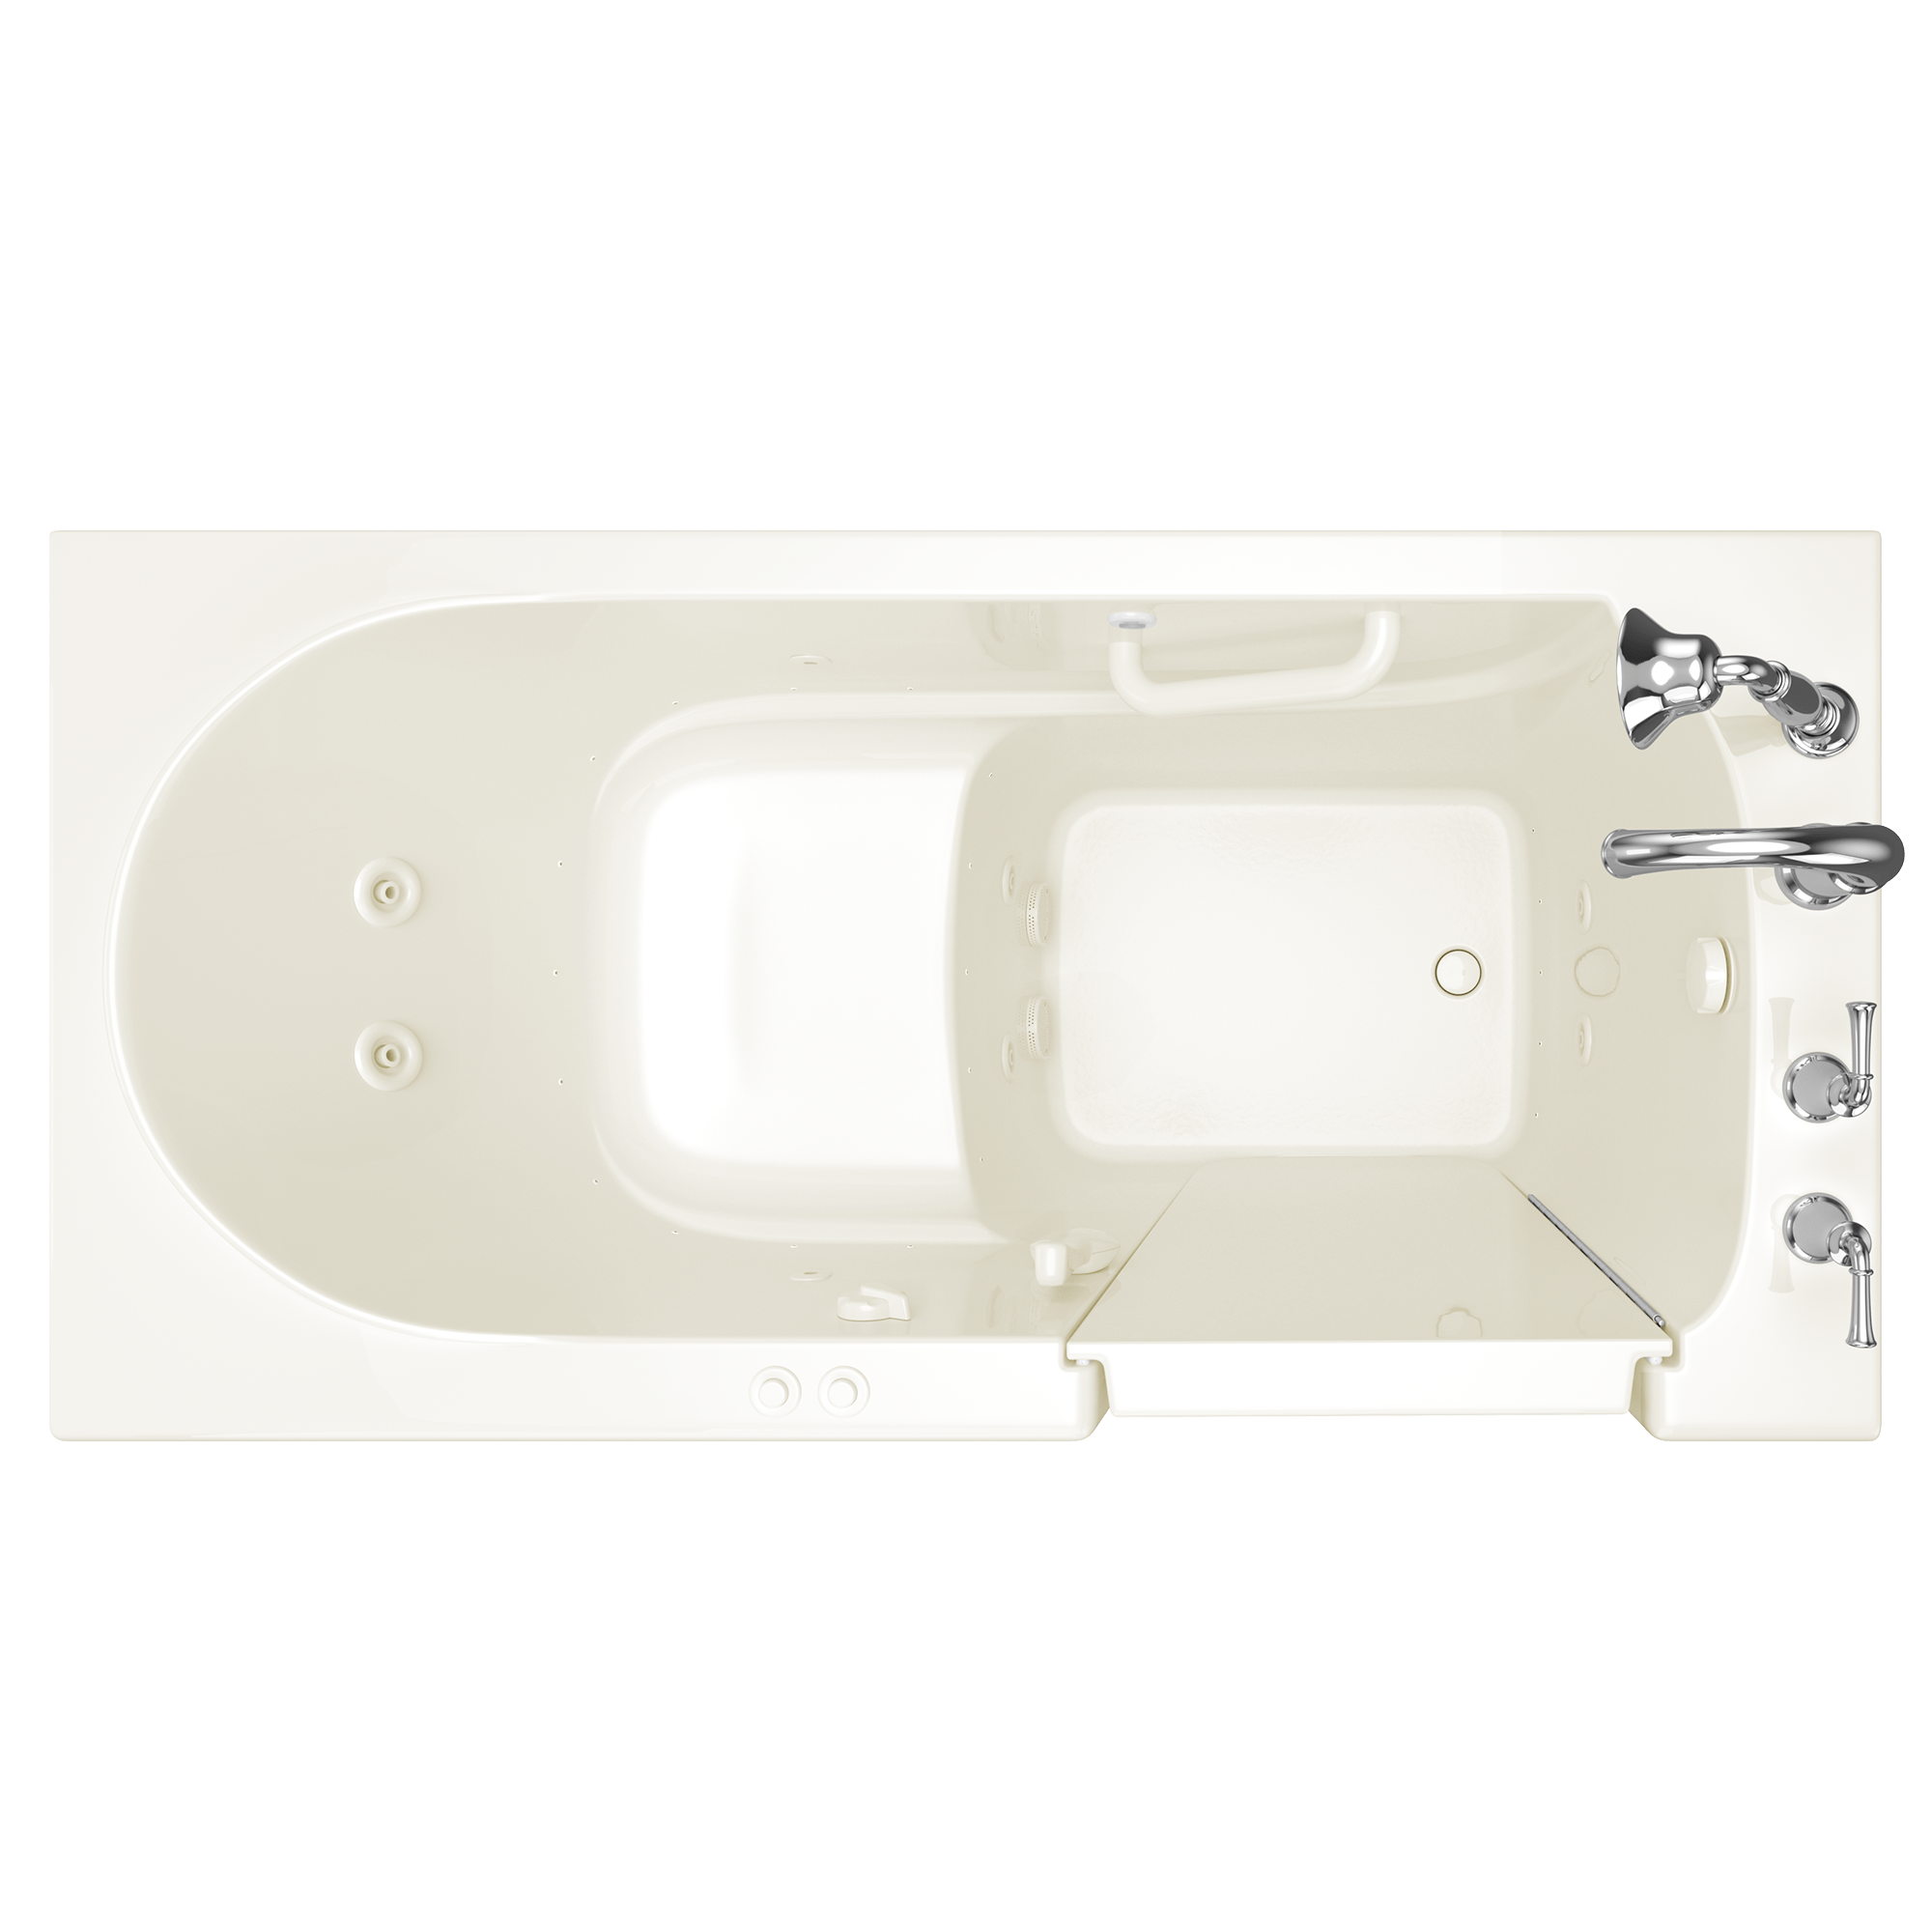 Gelcoat Value Series 30 x 60 -Inch Walk-in Tub With Combination Air Spa and Whirlpool Systems - Right-Hand Drain With Faucet